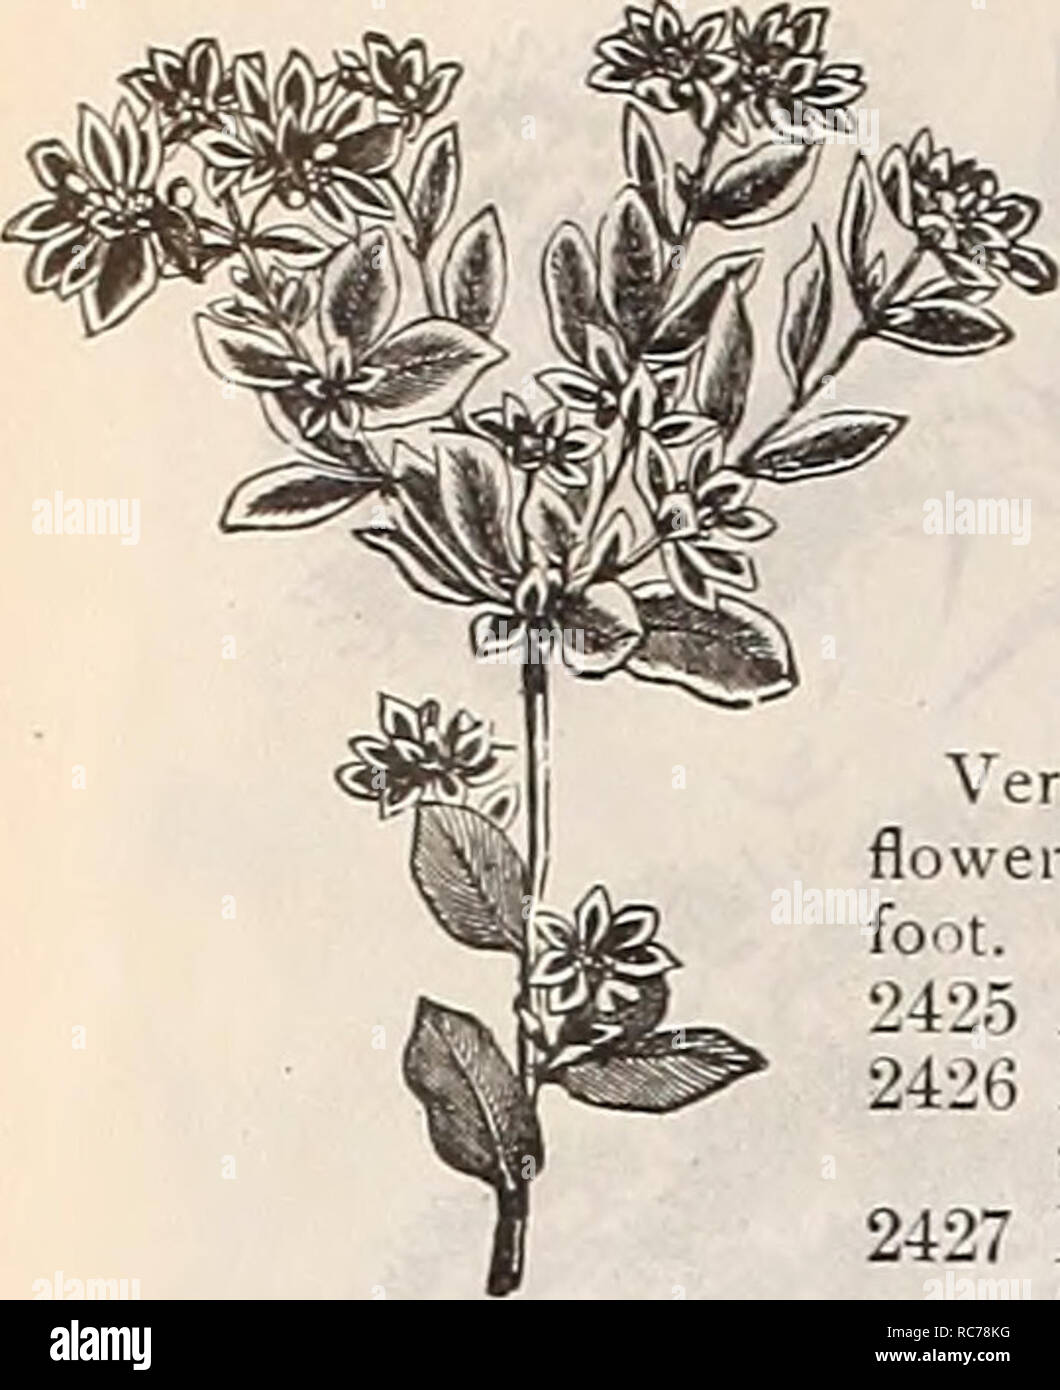 . Dreer's garden calendar : 1900. Seeds Catalogs; Nursery stock Catalogs; Gardening Equipment and supplies Catalogs; Flowers Seeds Catalogs; Vegetables Seeds Catalogs; Fruit Seeds Catalogs. IHENRTADREER-PNIlADPHIAI'ASf RELIABlE-fLOWERSEEDS. Euphorbia Vakiegata. ECCREMOCARPUS SCABER. (Chilian Glory-flower.) per pkt, 2394 A beautiful annual climber. Trained to a trellis or waii, it forms an ornamental object throughout the summer, its bright orange tulnilar flowers contrasting effectively with the delicate green of the foliage. (See cut.) 10 ESCHSCHOETZIA. (Calitoriiia Popi&gt;y.) Very attractiv Stock Photo